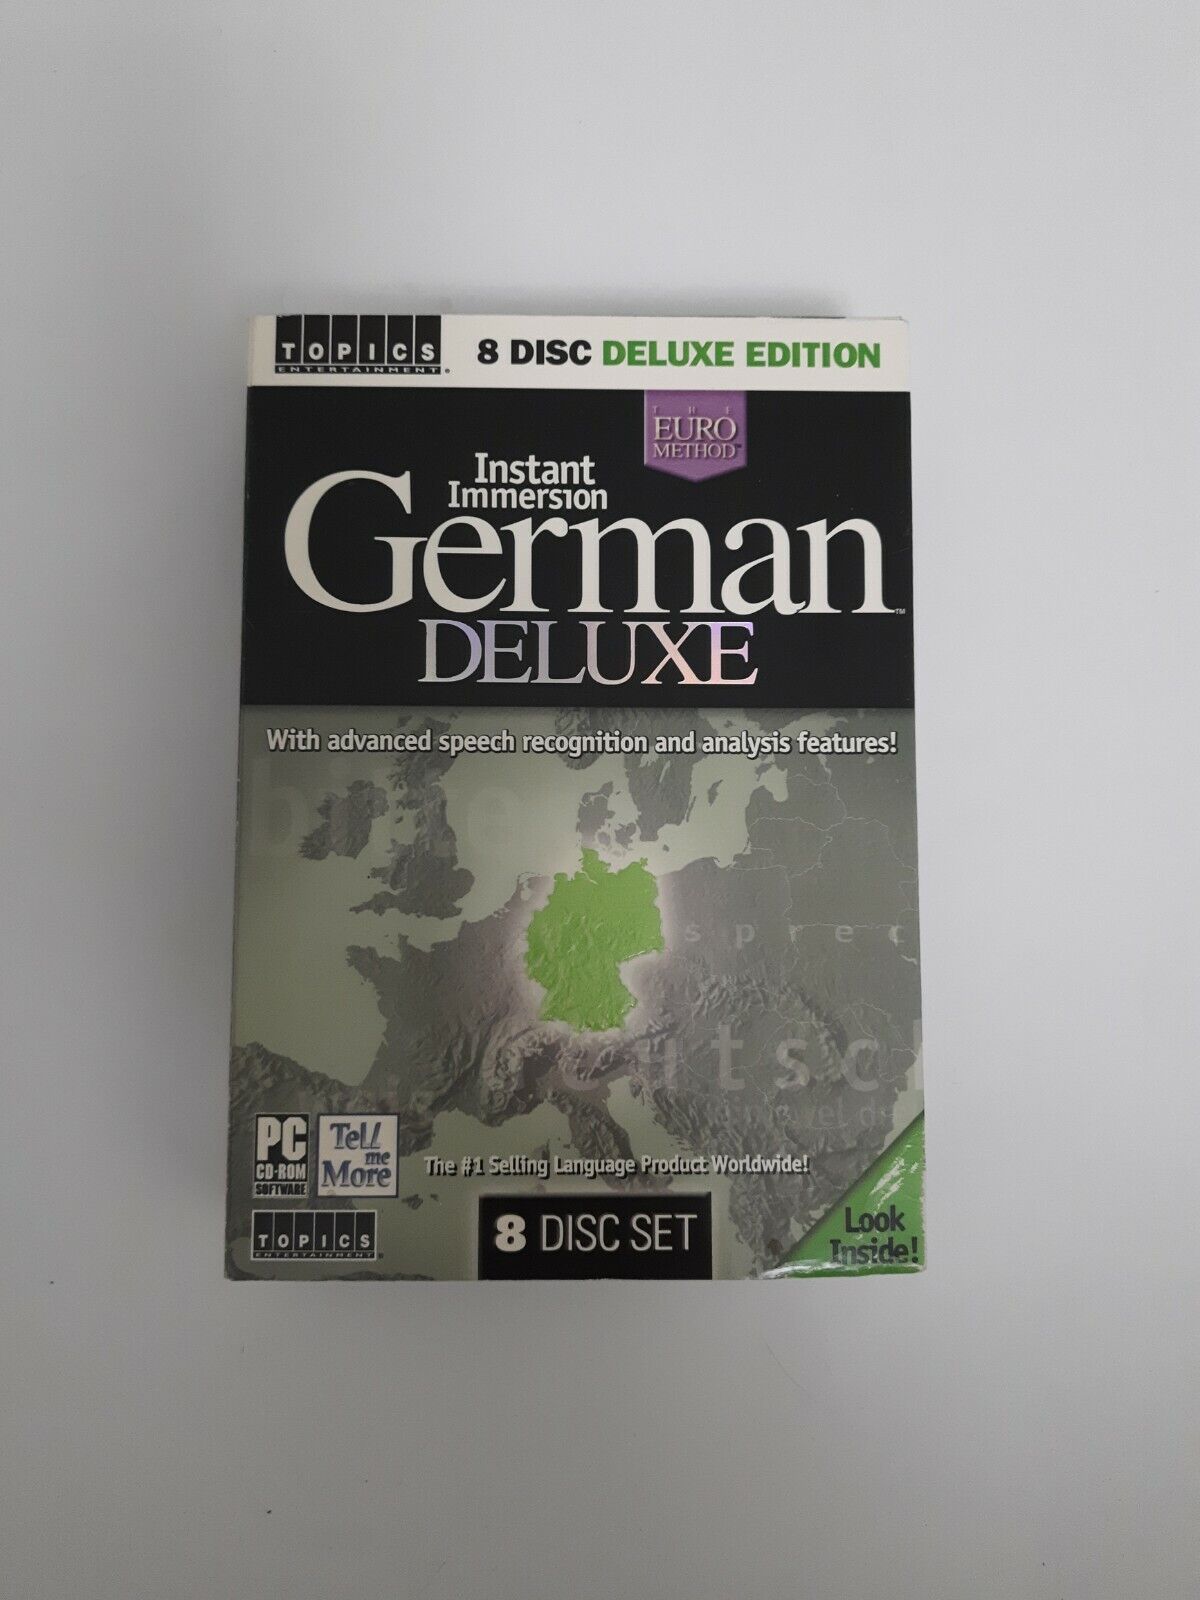 Topics Entertainment Learn German Language Deluxe 8 CD Disc Set PC Interactive 